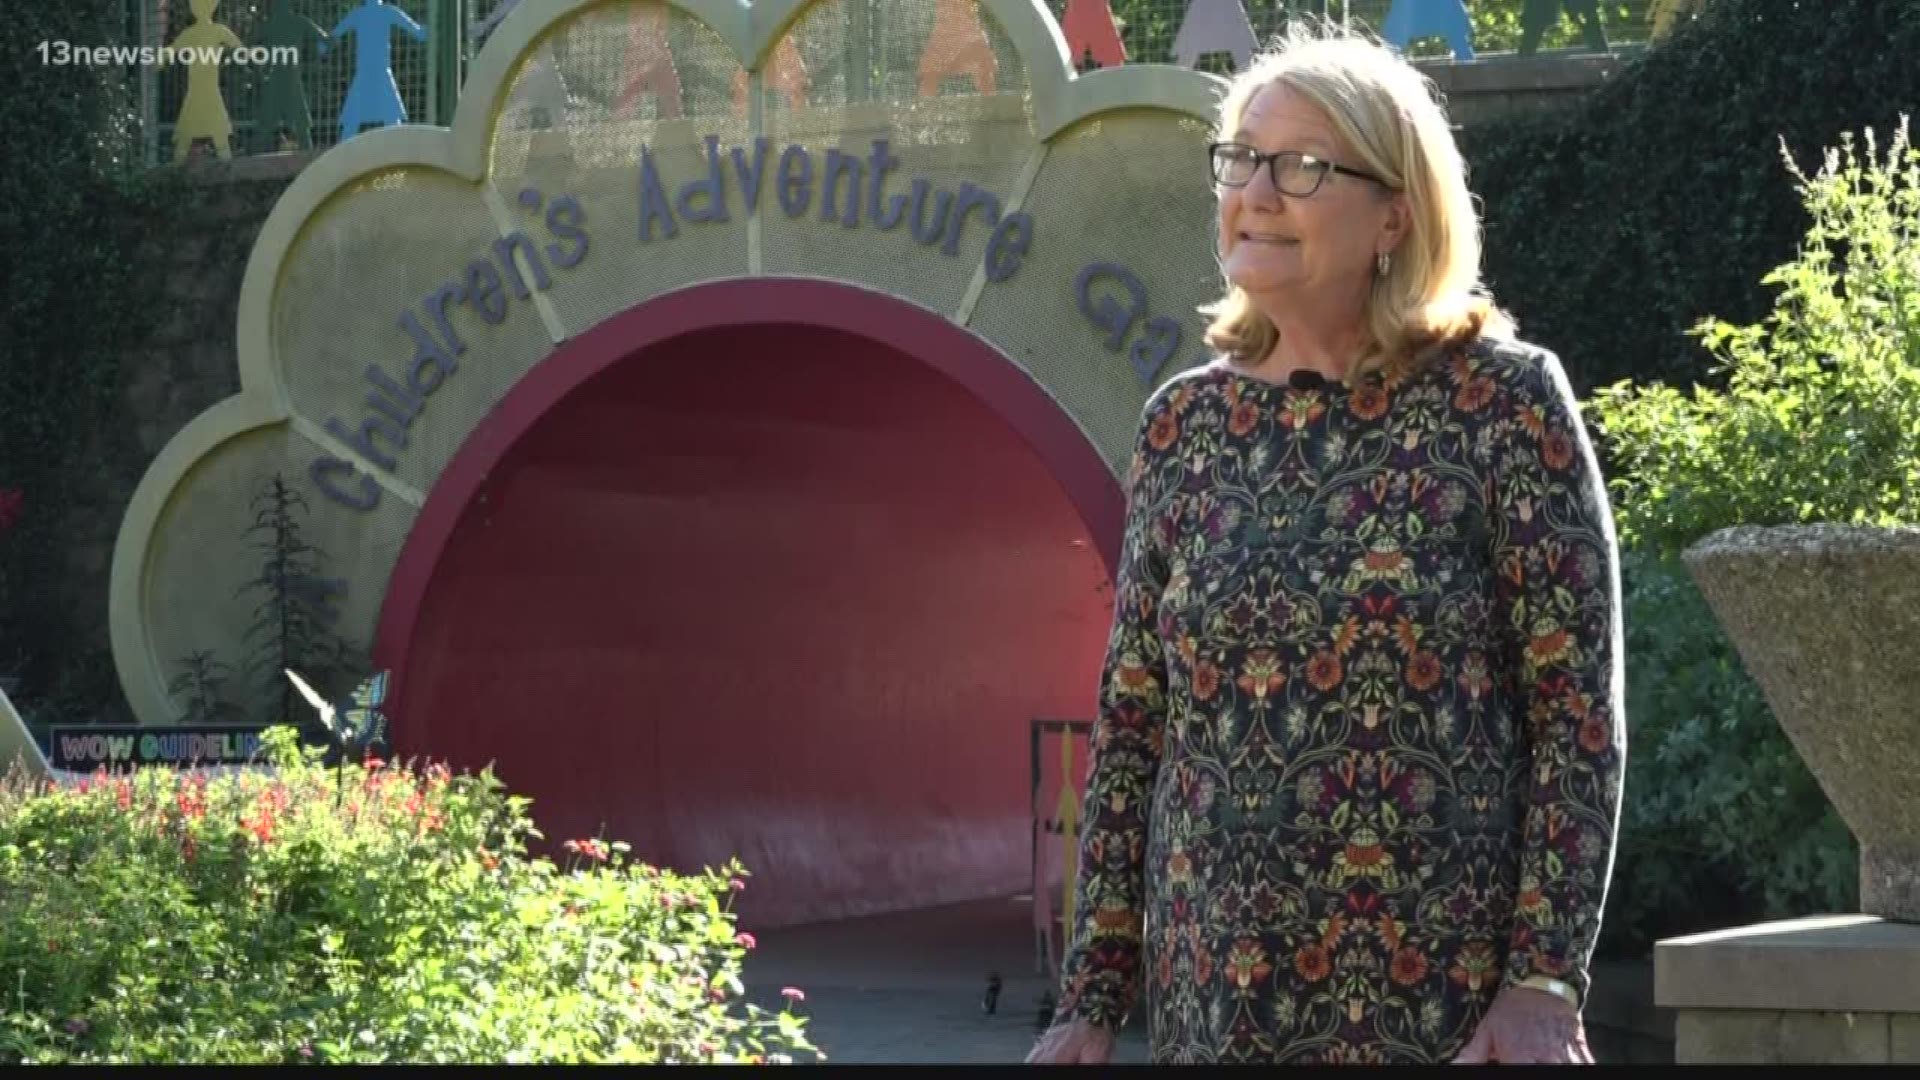 13News Now Ashley Smith caught up with one woman who has been volunteering at the Norfolk Botanical Garden for almost 30 years.